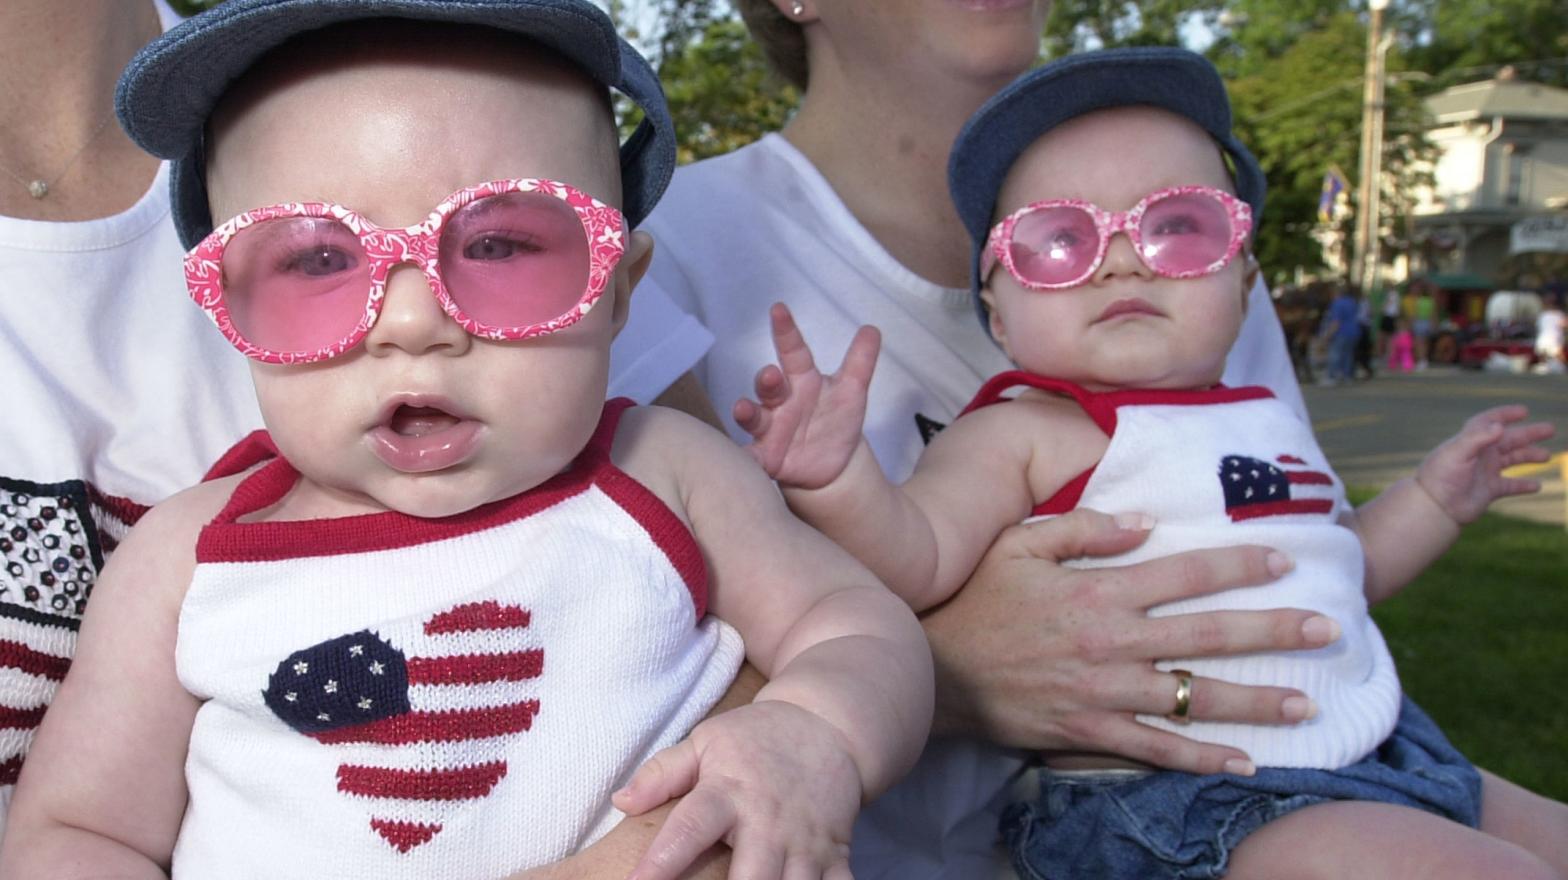 7-month-old twins  taking part in the Double Take Parade held August 3, 2002 at the Twins Days Festival in Twinsburg, Ohio.  (Photo: Mike Simons, Getty Images)